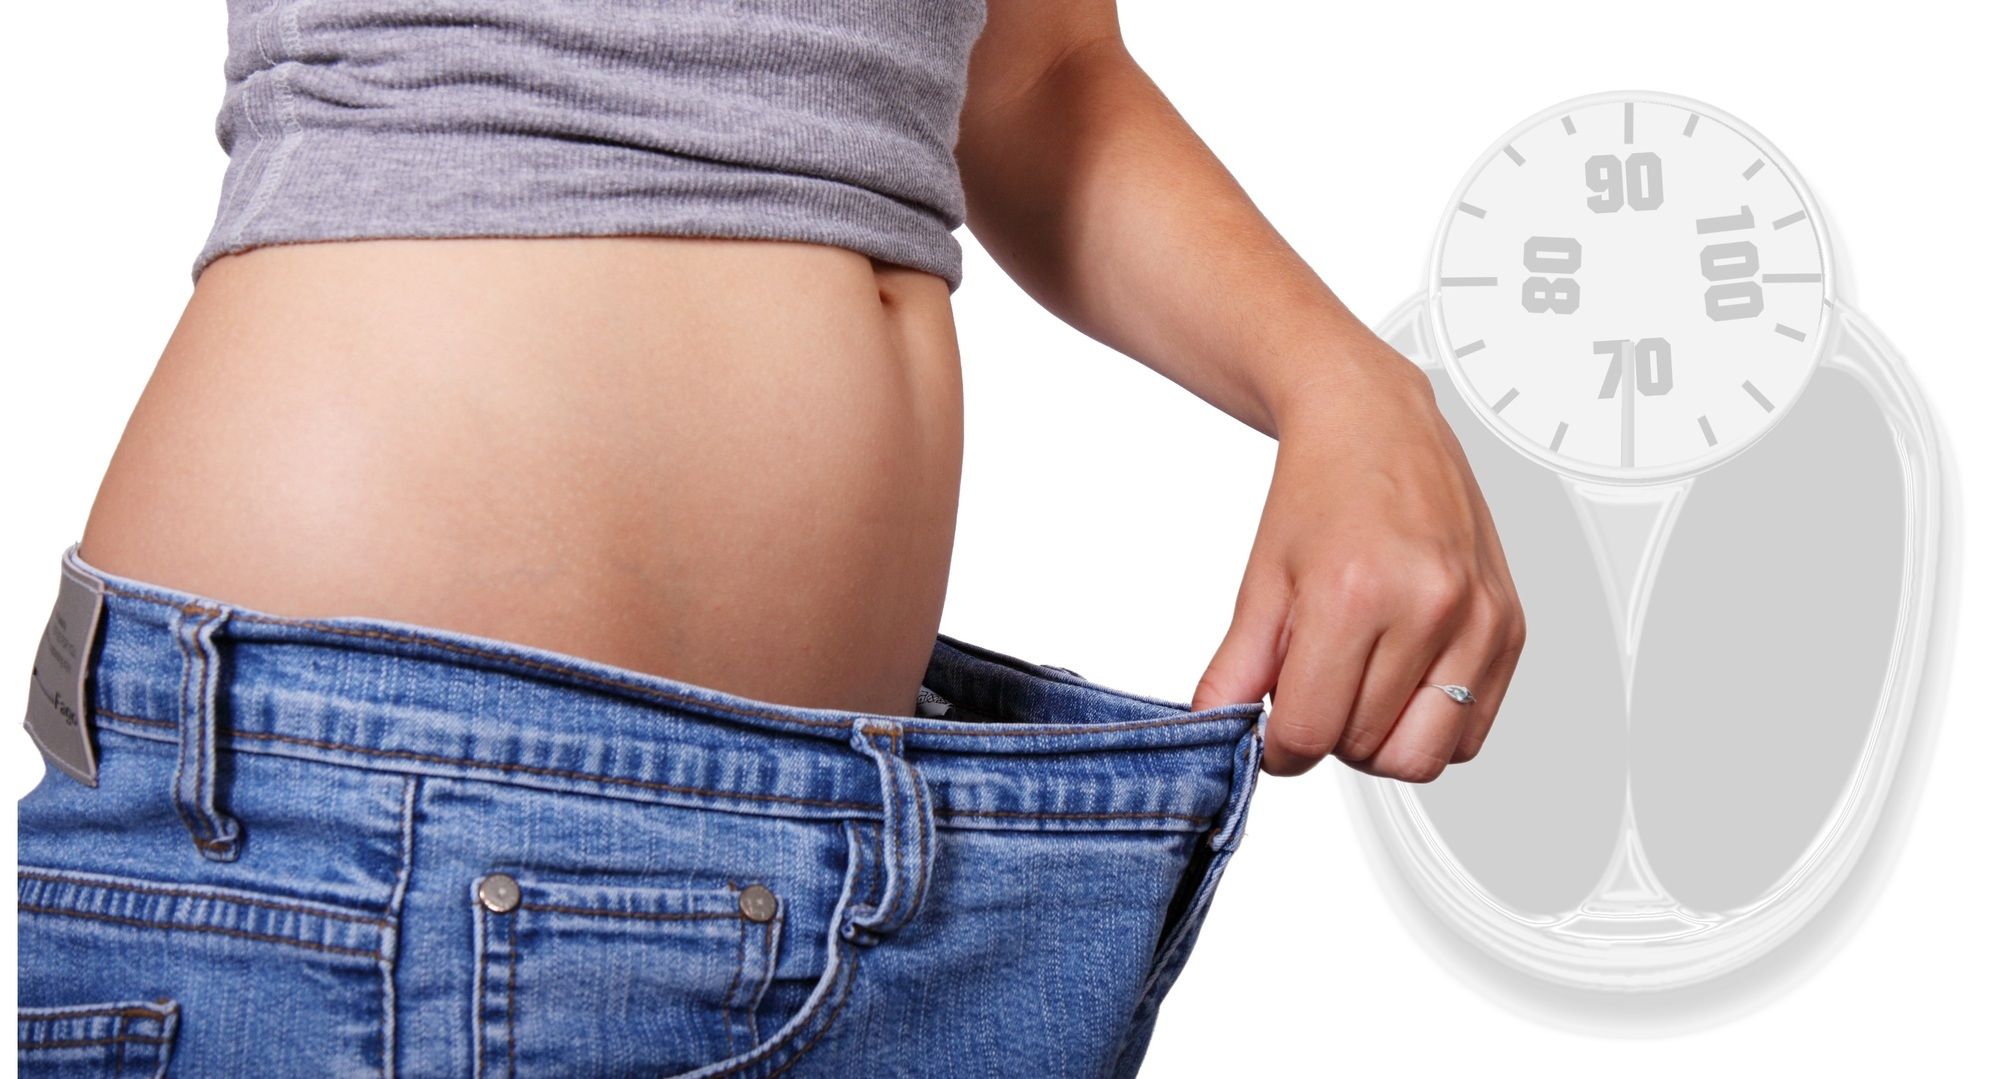 Image of Lady showing weight loss representing metabolic renewal